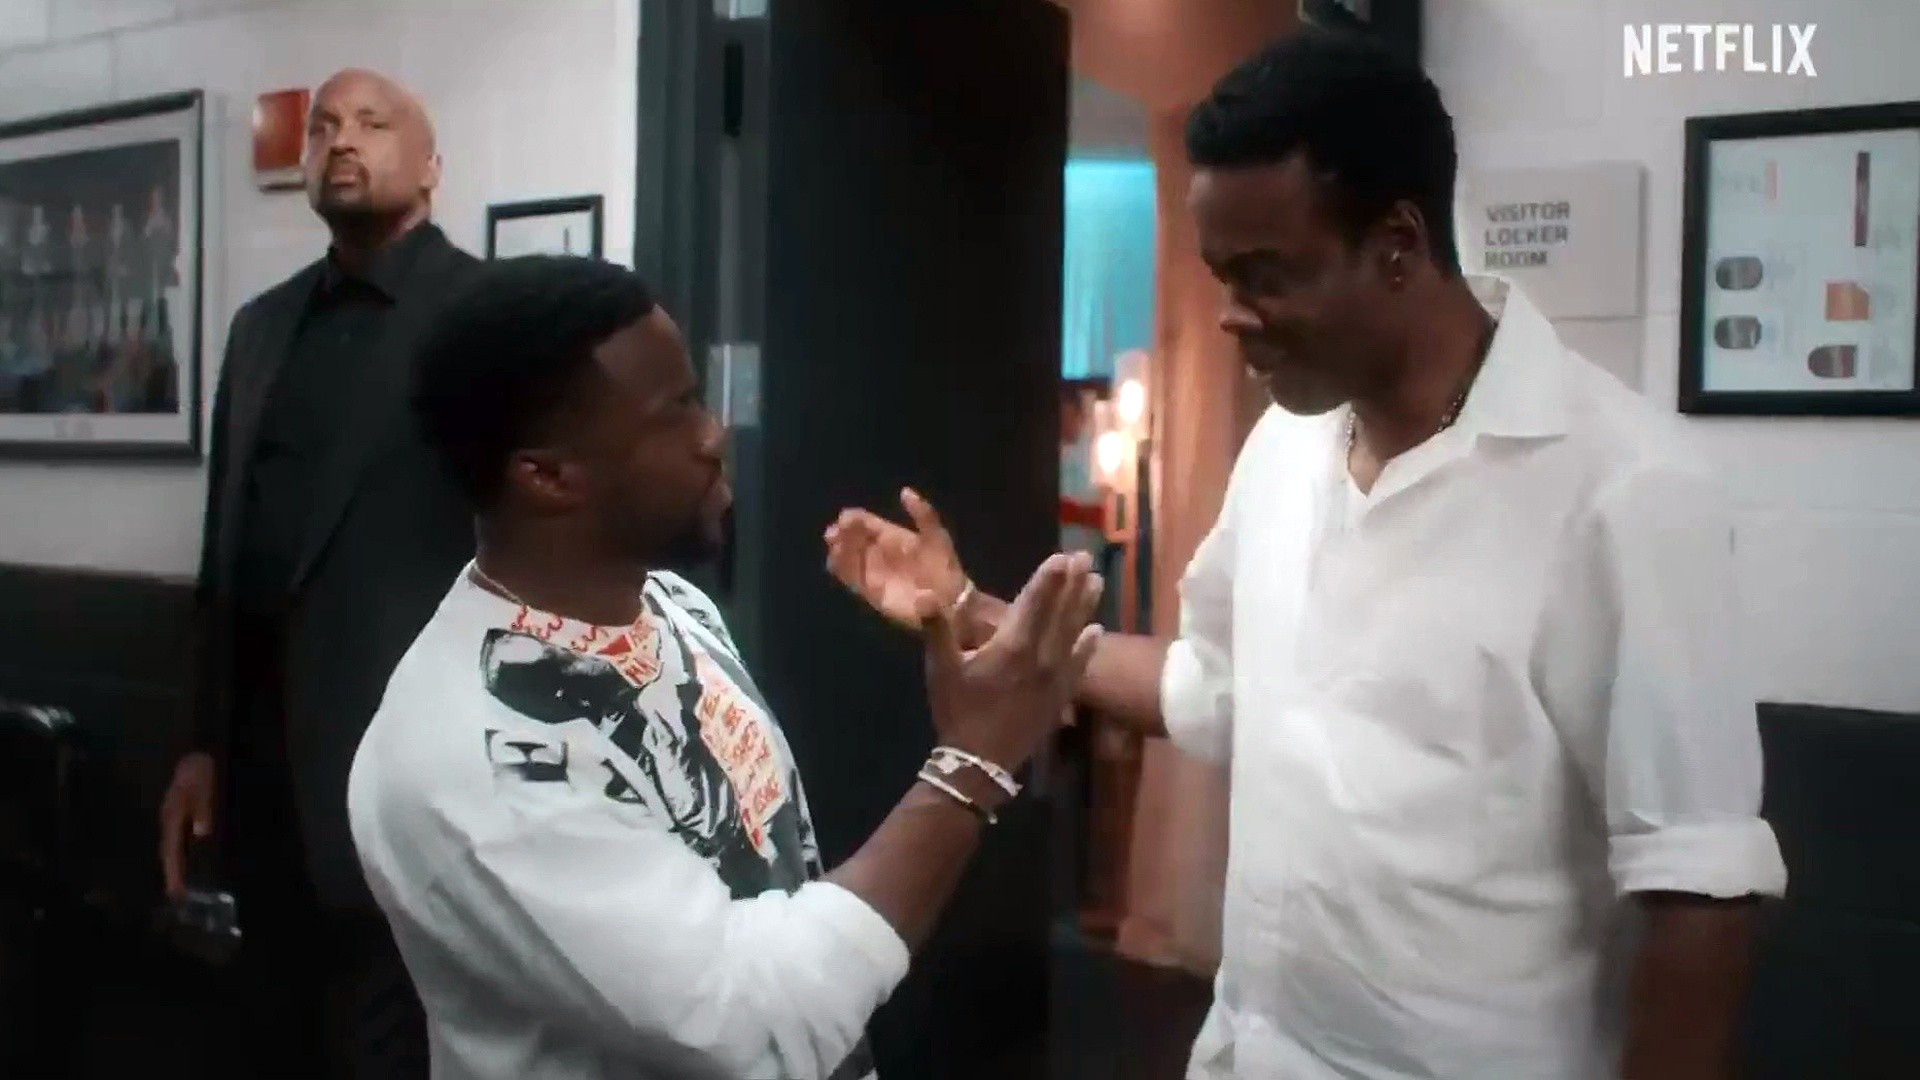 Netflix doc goes behind the scenes of Chris Rock, Kevin Hart tour